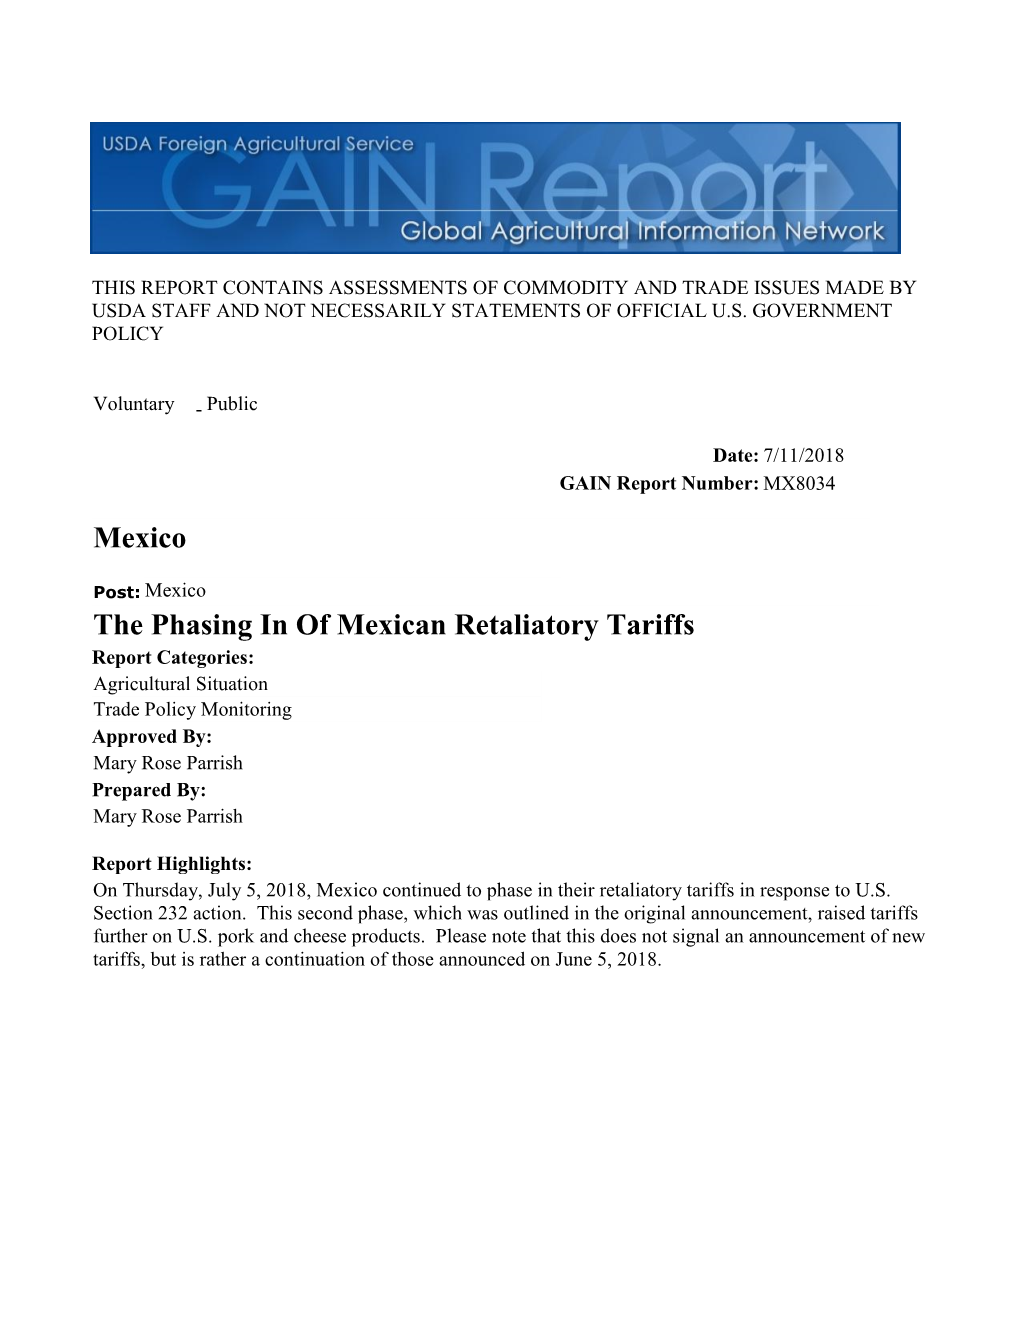 The Phasing in of Mexican Retaliatory Tariffs Mexico